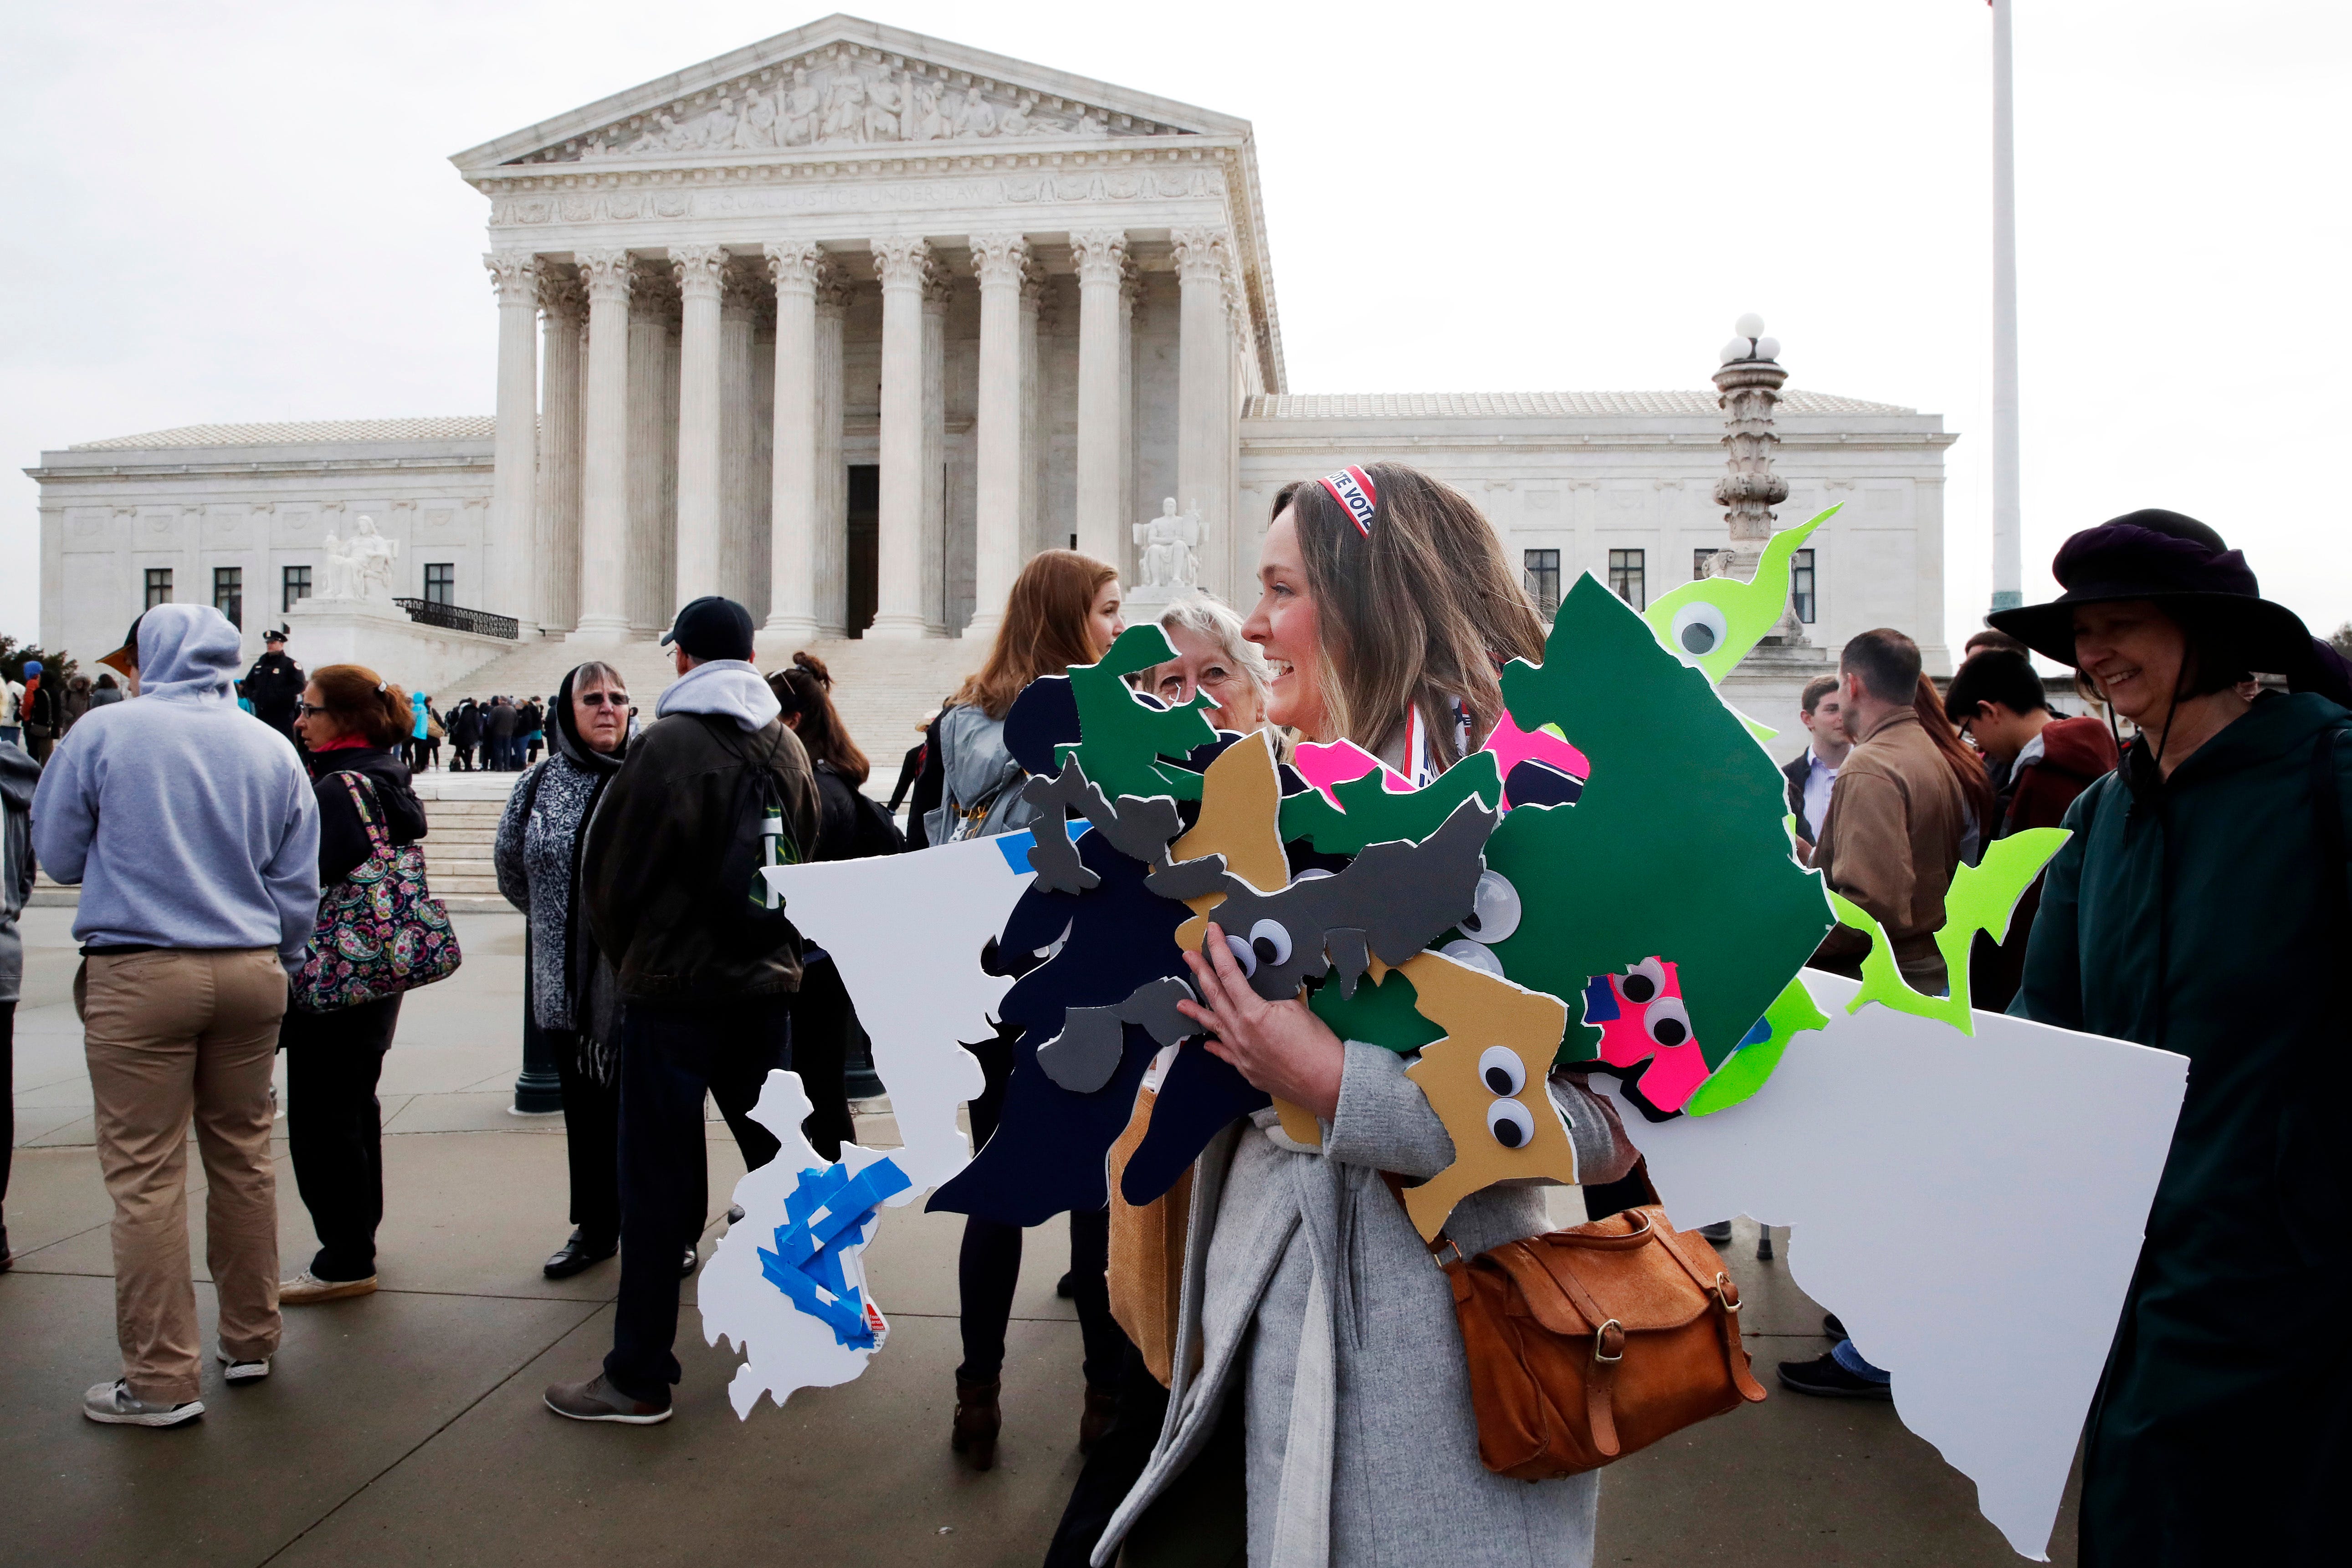 Ashley Oleson, with the League of Women Voters of Maryland, carries signs of Maryland's districts, as nonpartisan groups against gerrymandering protest in front of the Supreme Court, March 28, 2018, in Washington where the court will hear arguments o